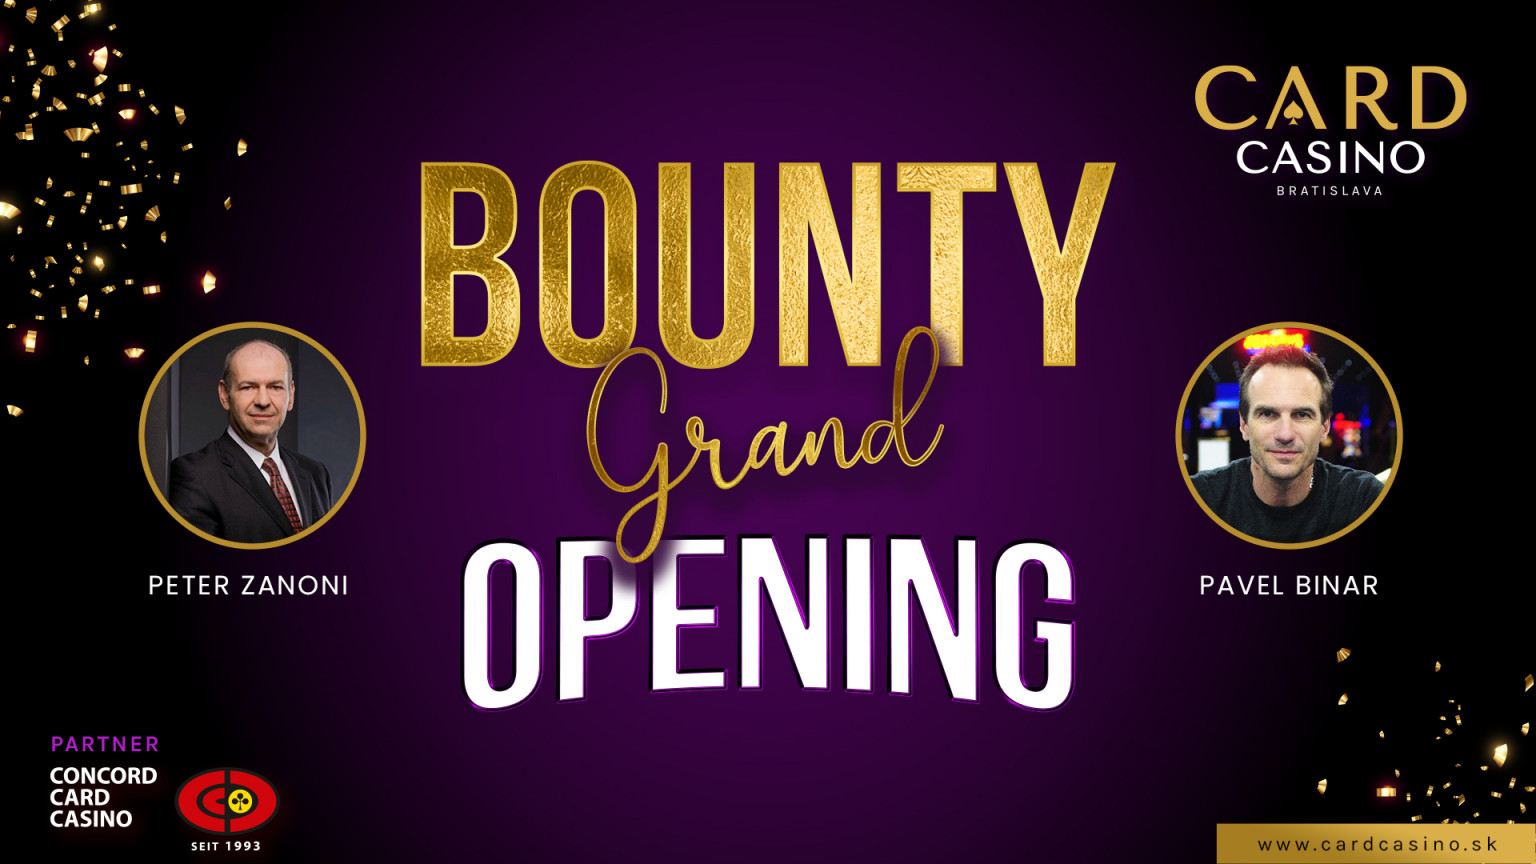 The Grand Opening is this Saturday. Players can expect €50,000 GTD and awesome BOUNTY prizes!